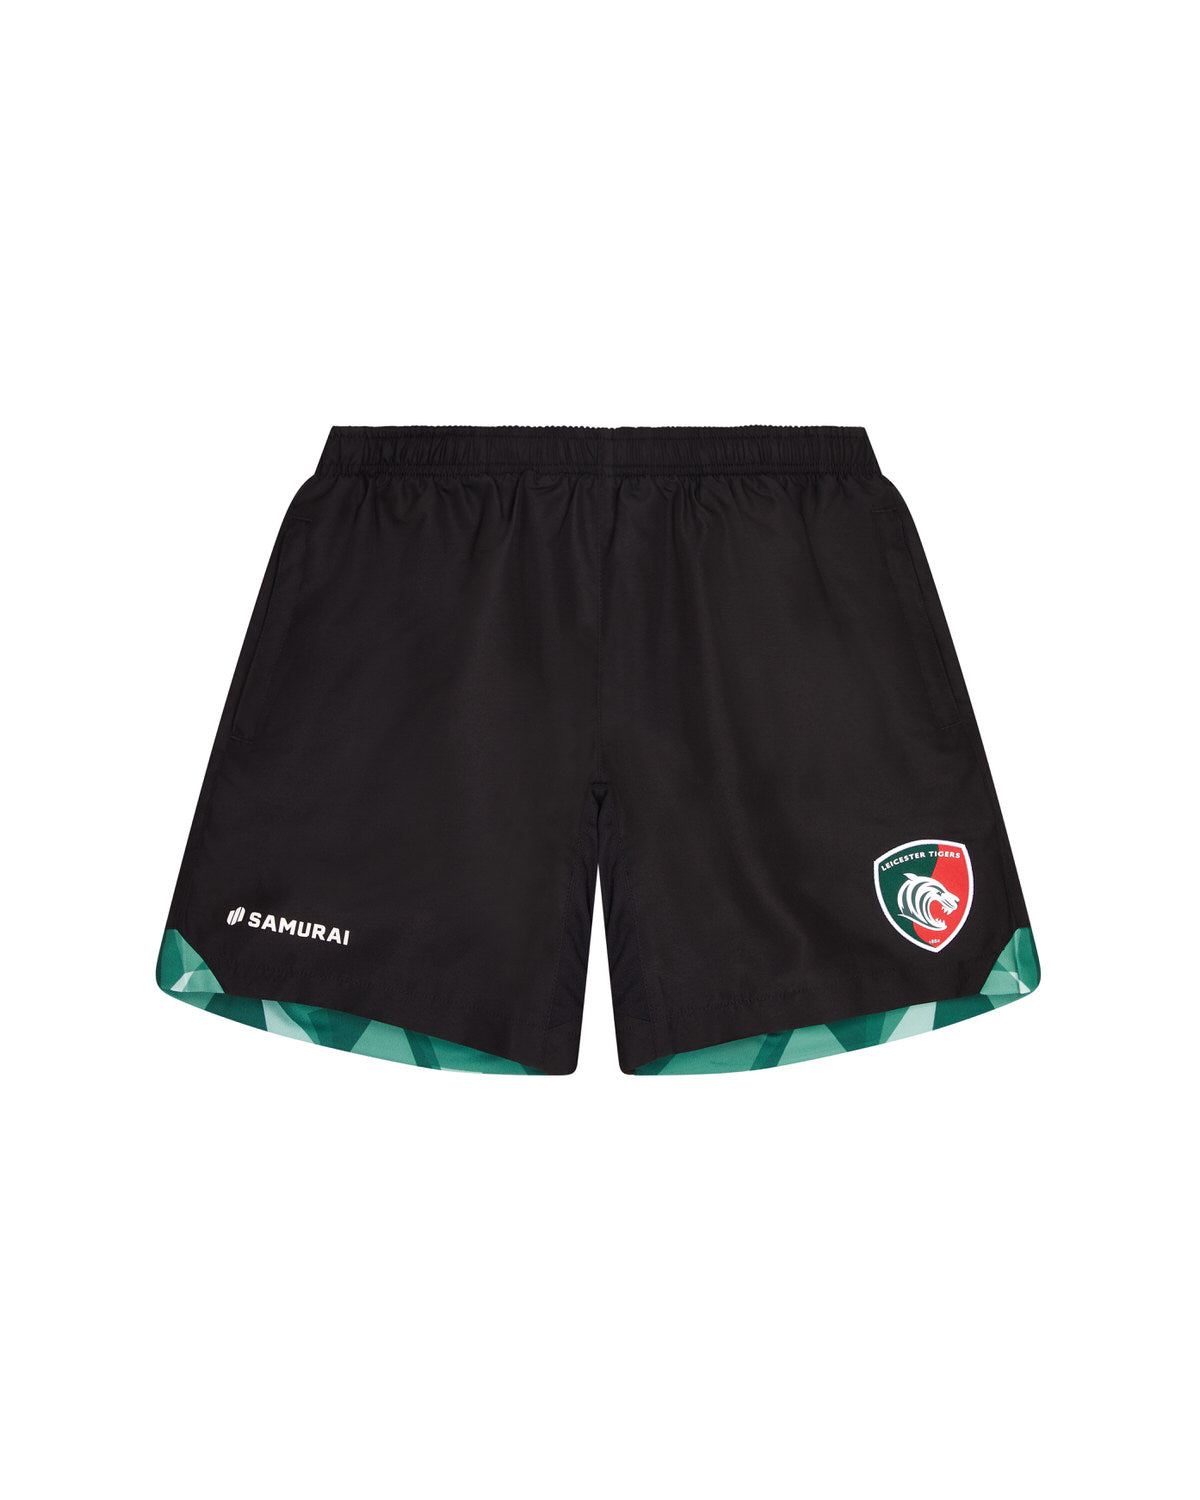 Leicester Tigers - Obsidian Leisure Short - Black